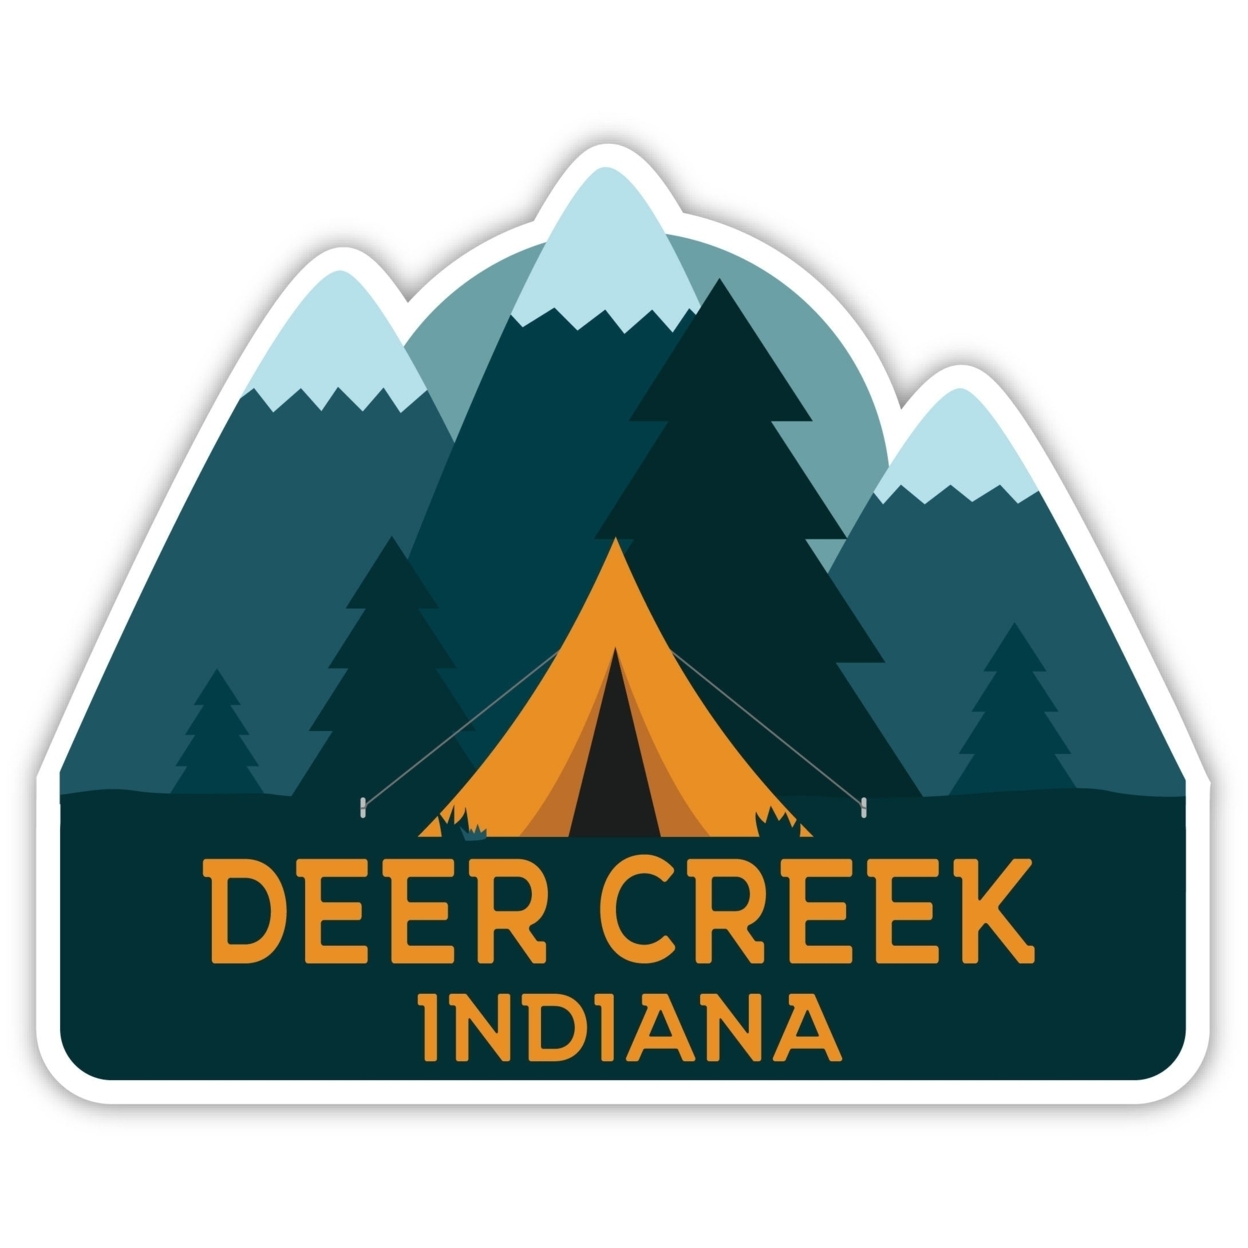 Deer Creek Indiana Souvenir Decorative Stickers (Choose Theme And Size) - 4-Pack, 2-Inch, Tent